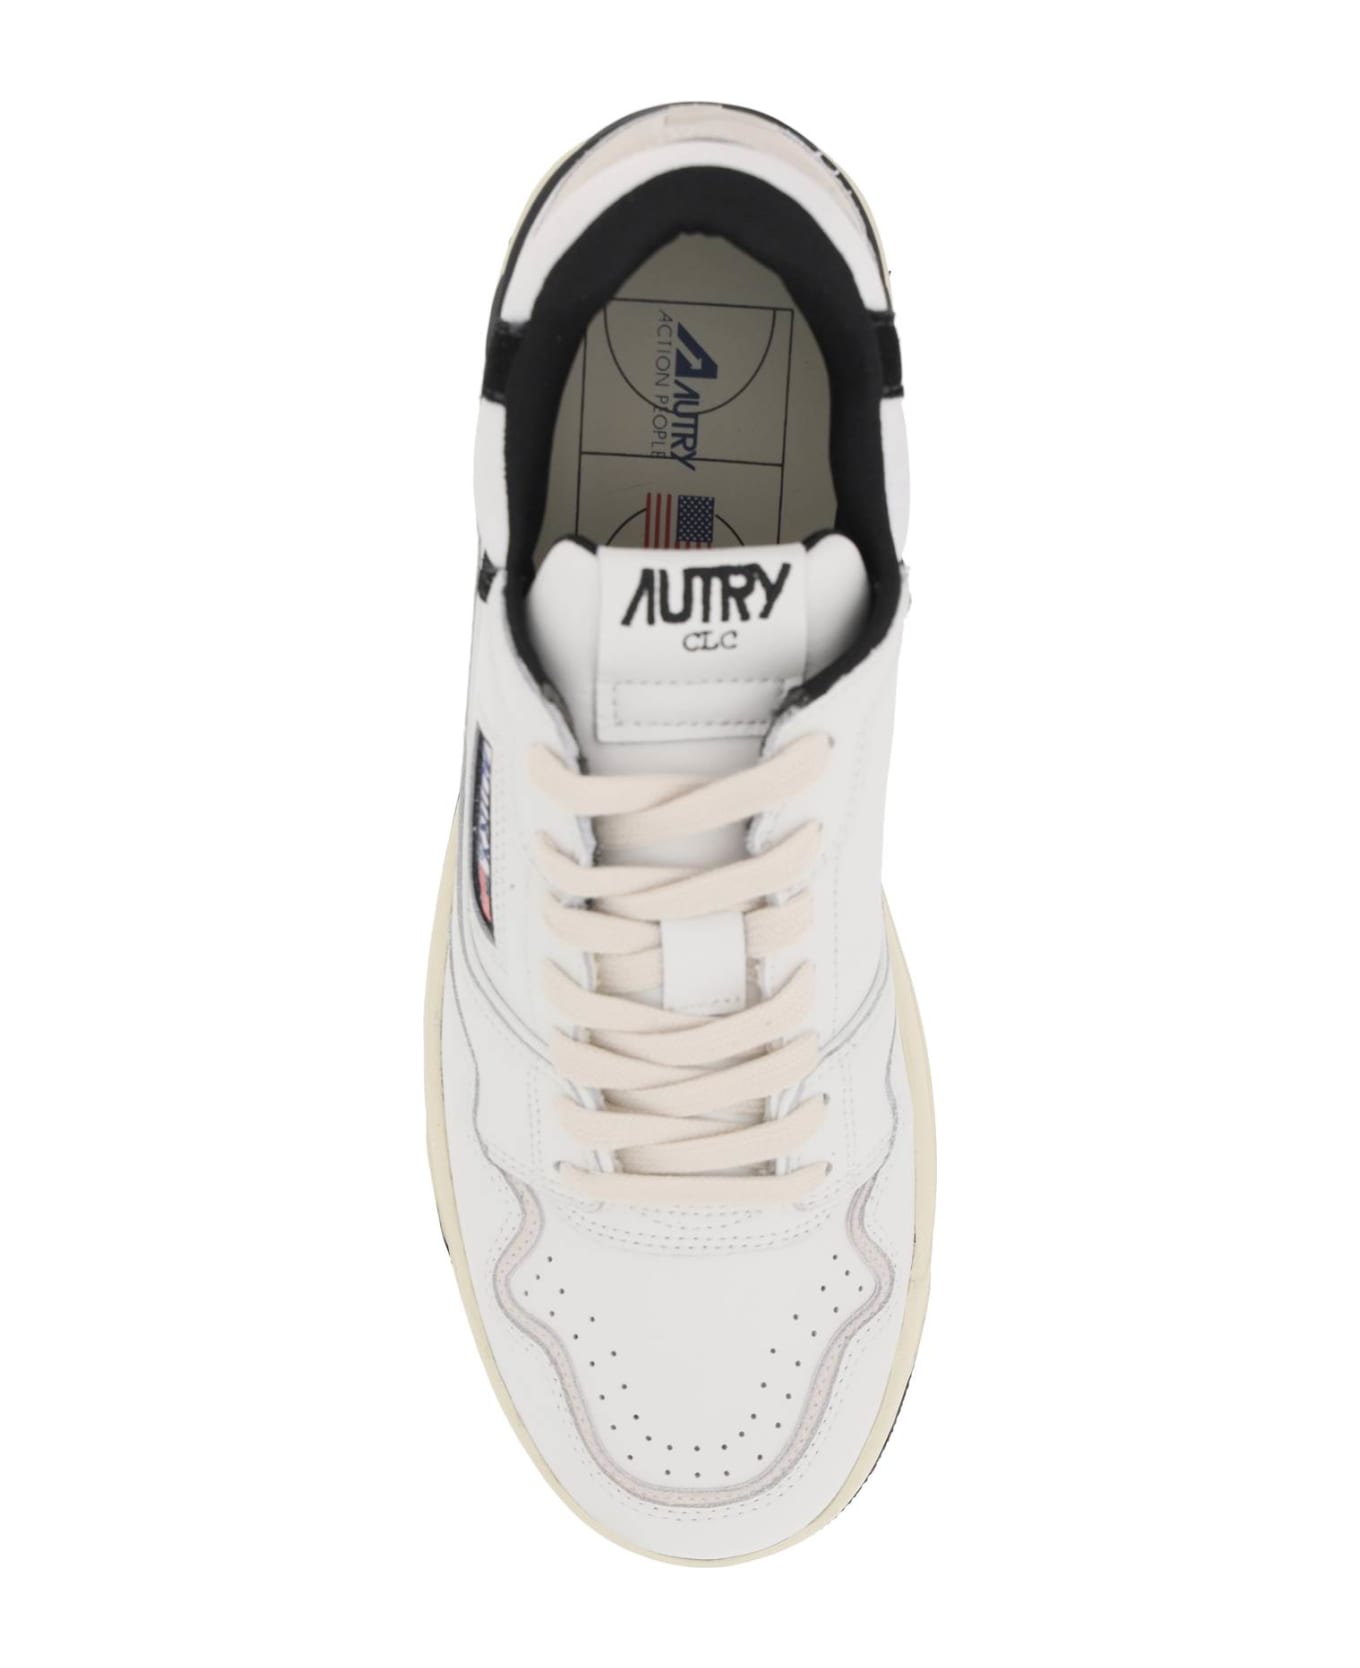 Autry Clc Sneakers In White And Black Leather - White